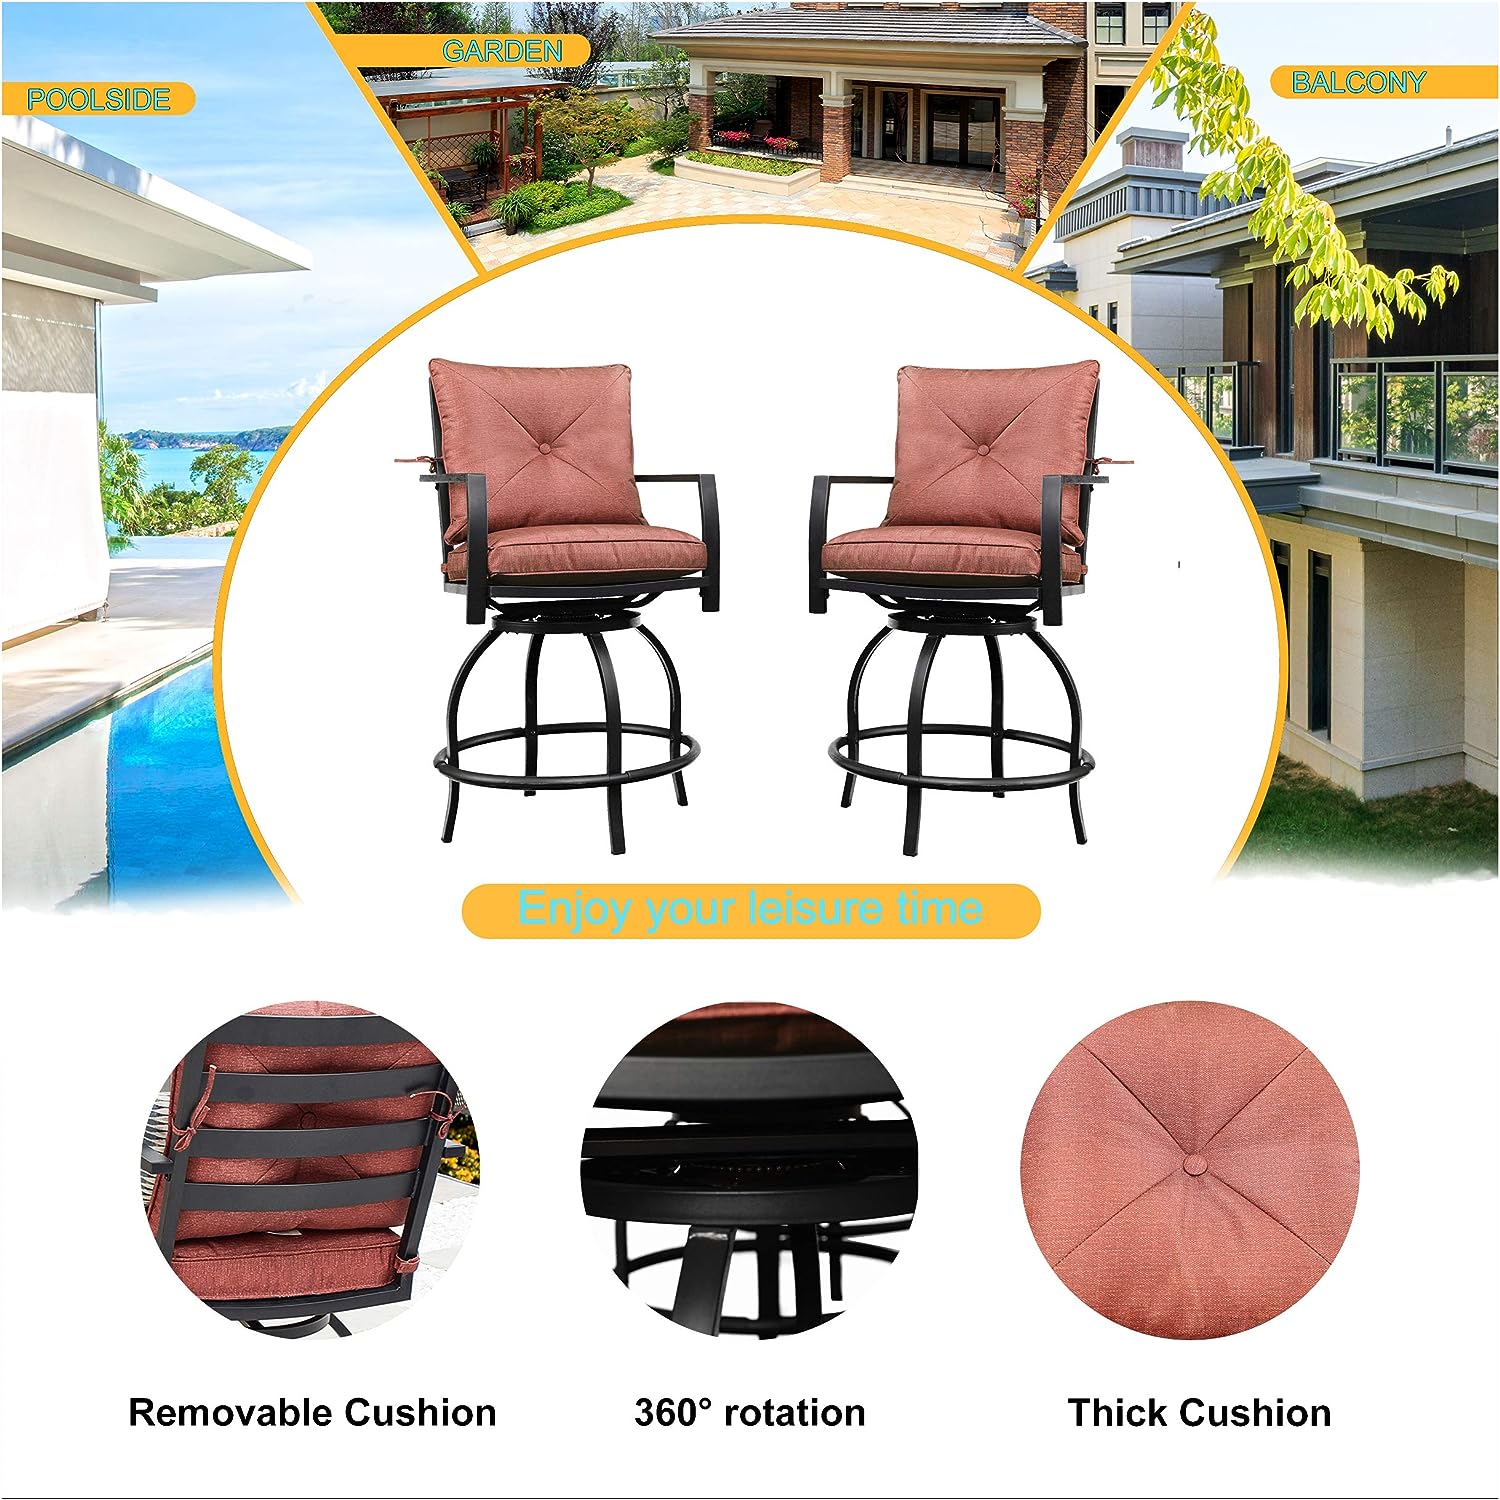 Festival Depot 2 Pcs Patio Swivel Chairs Bar Set Outdoor Furniture with Armrest, Back Seat Cushions and All-Weather Black Metal Steel Frame Legs for Poolside Deck Garden